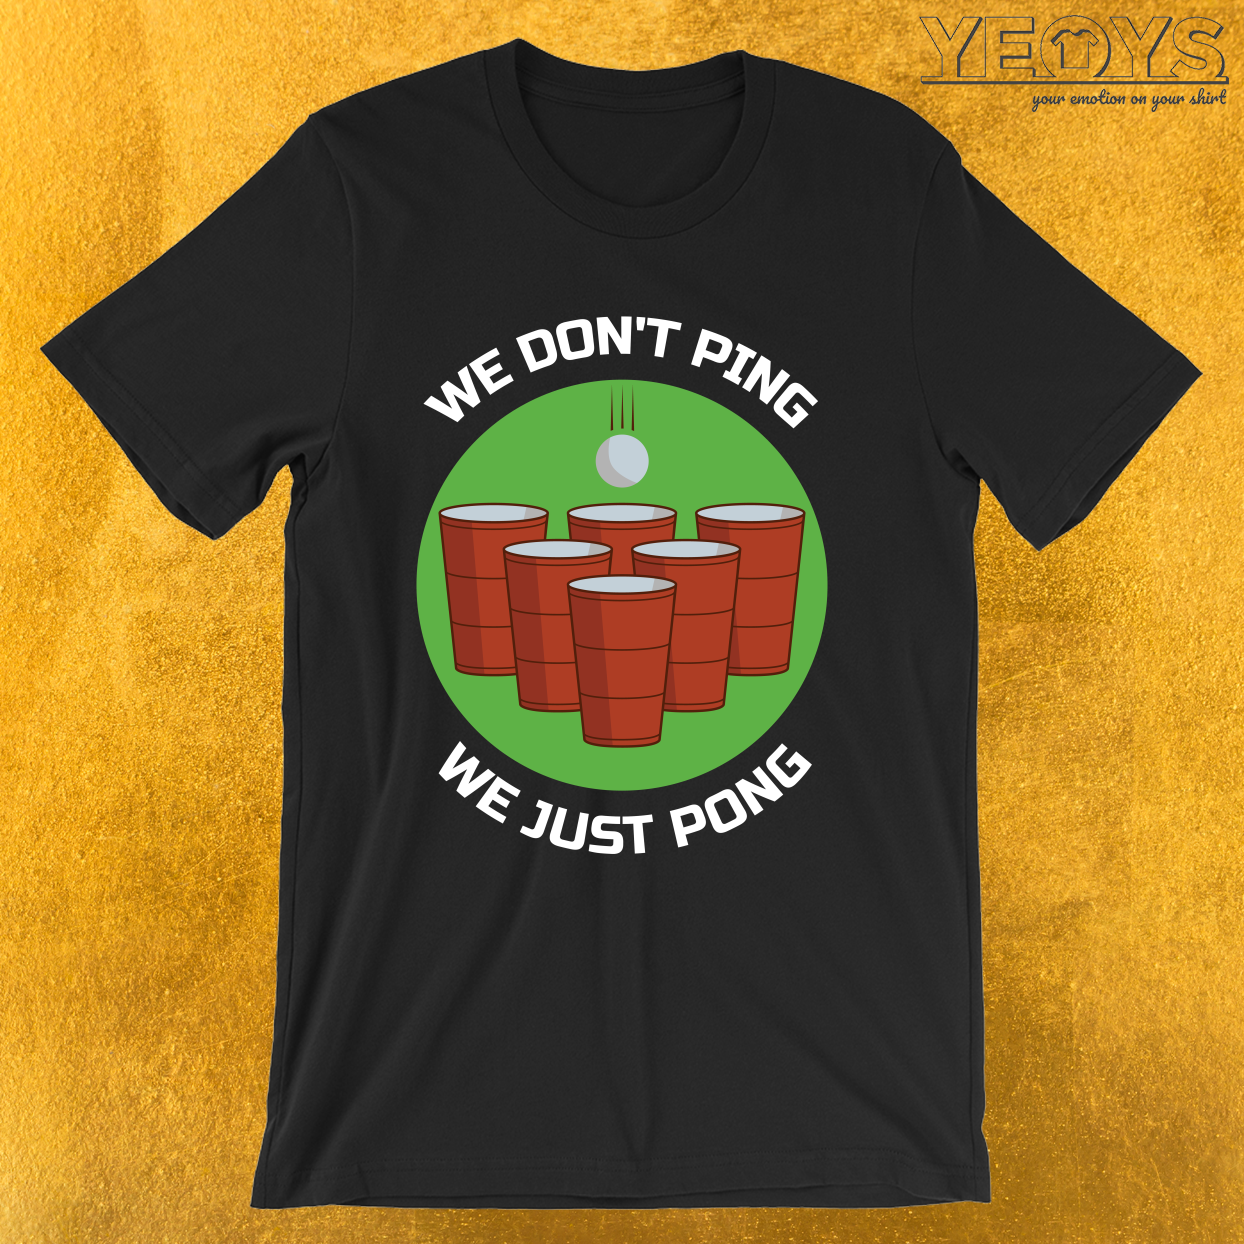 We Don’t Ping We Just Pong – Funny Beer Pong Tee